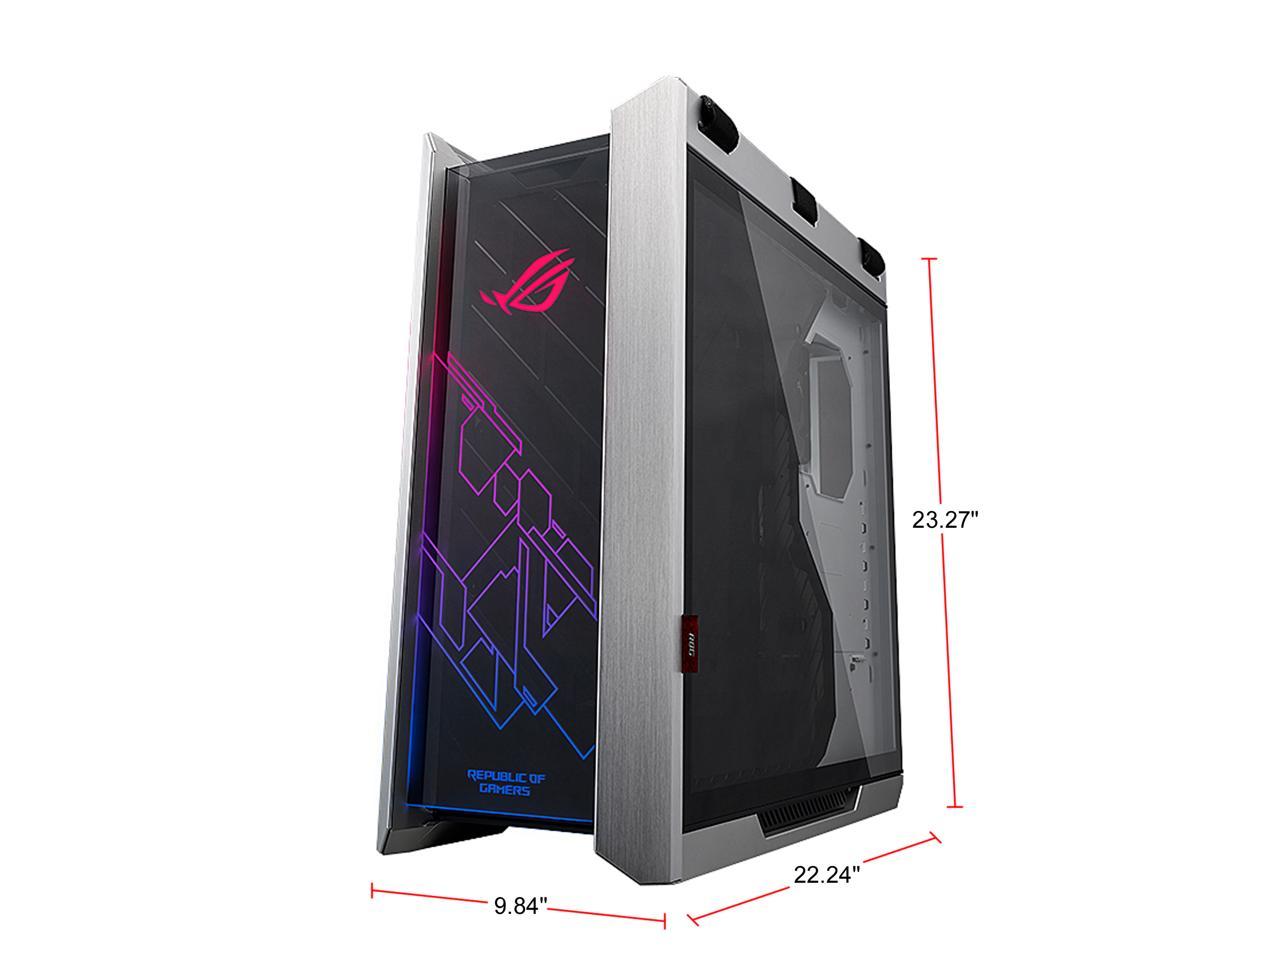 ASUS ROG Strix Helios GX601 White Edition RGB Mid-Tower Computer Case for ATX/ EATX Motherboards with Tempered Glass, Aluminum Frame, GPU Braces, 420mm Radiator Support and Aura Sync - image 4 of 5